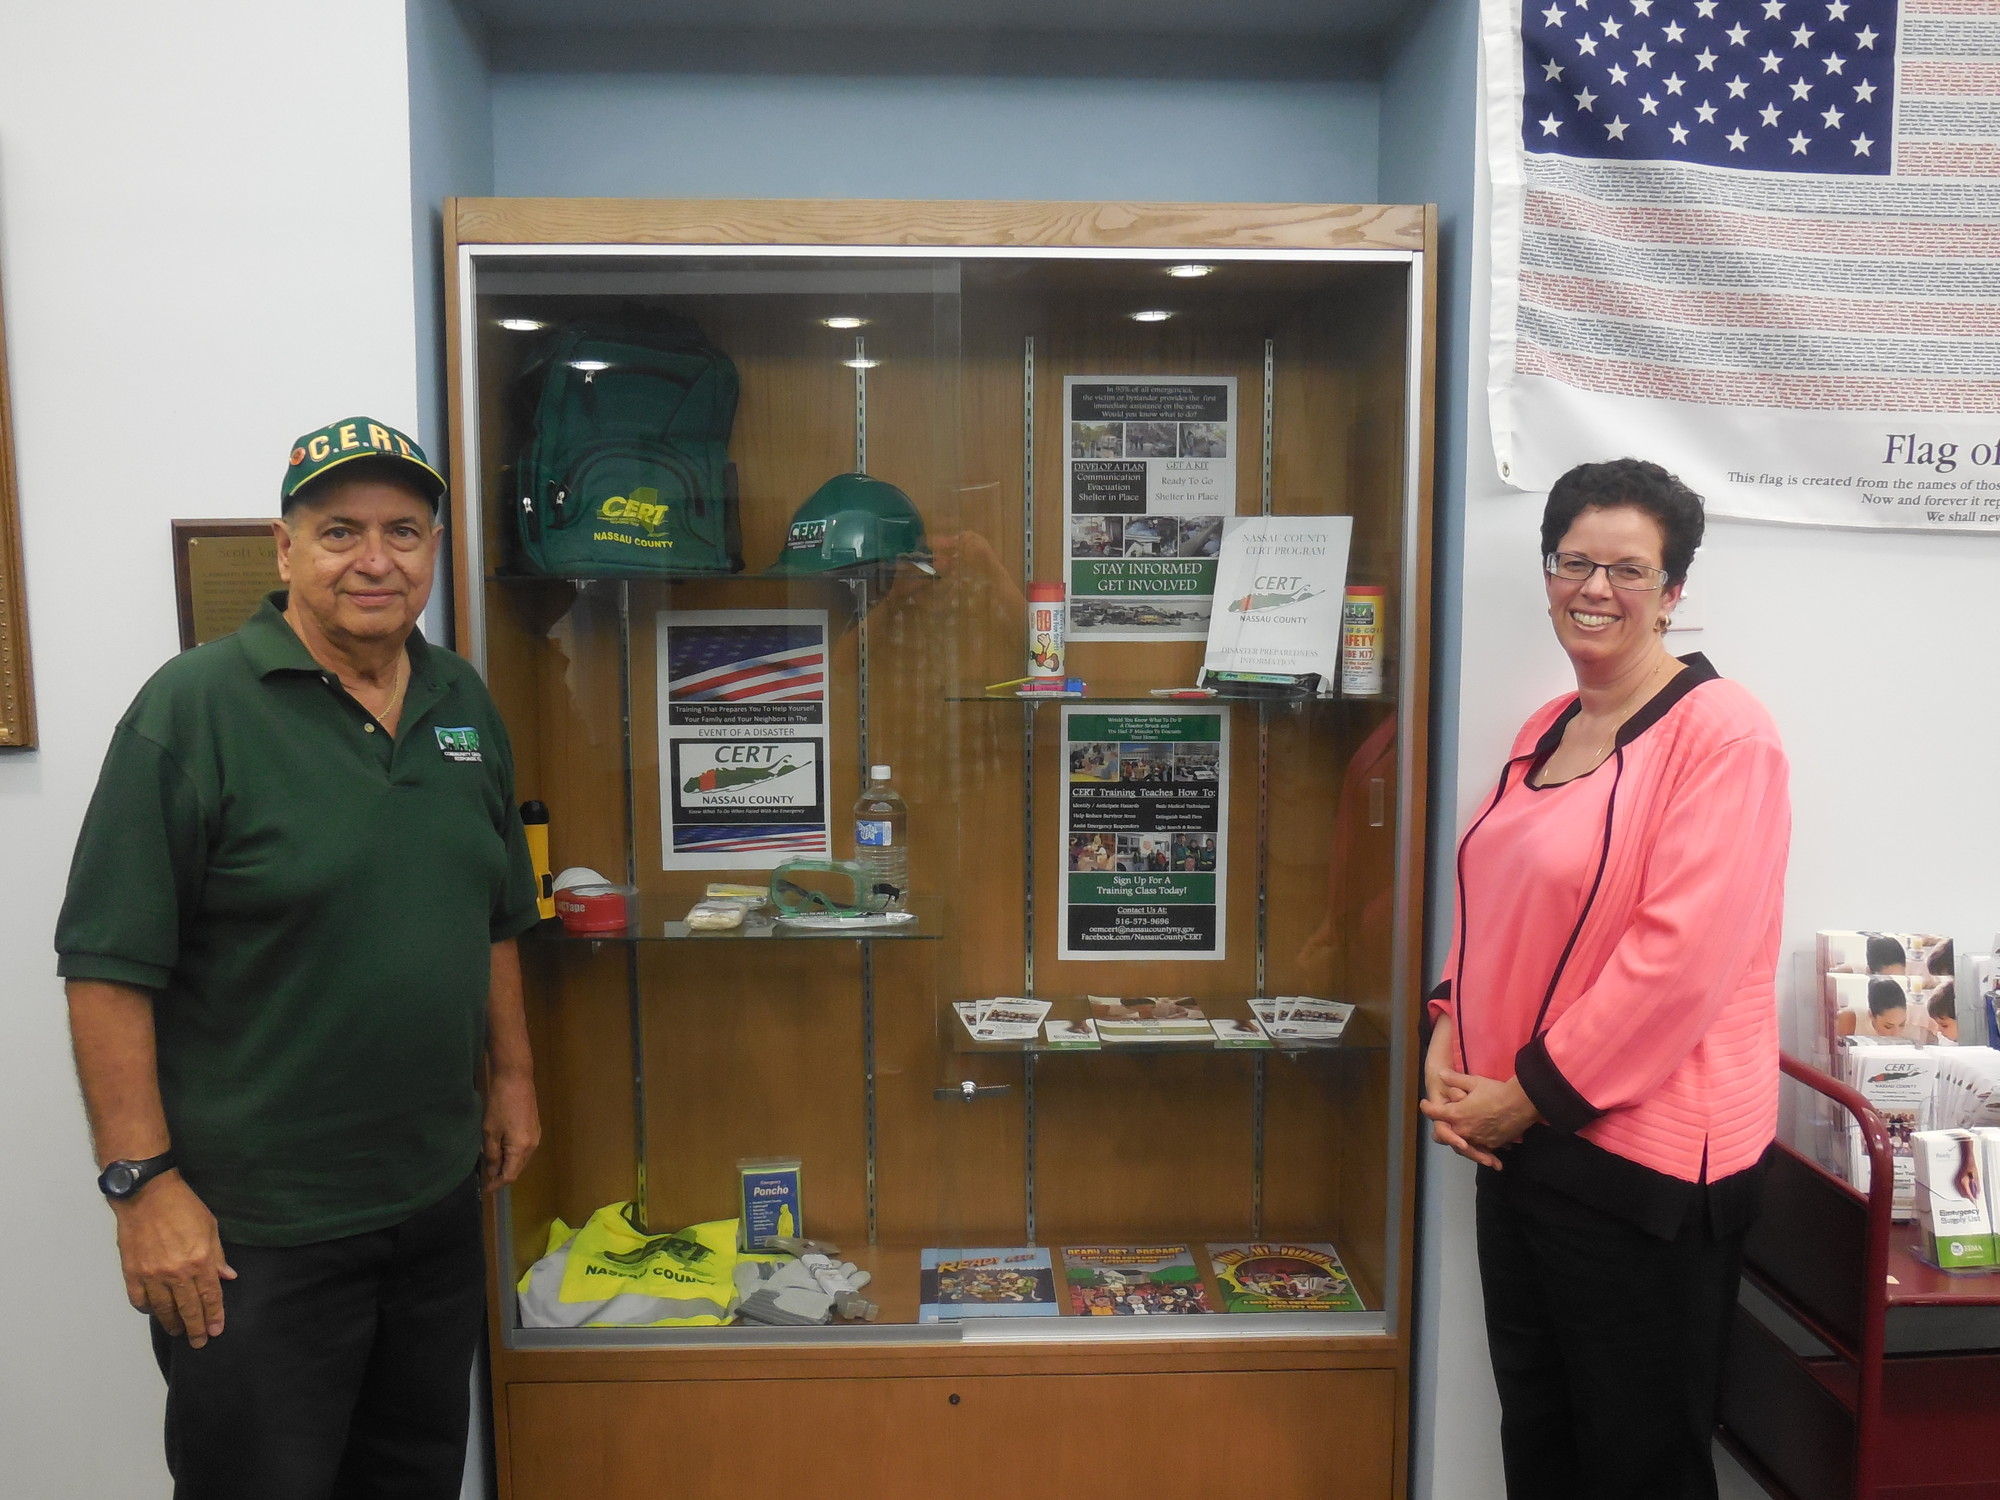 Island Park Public Library Trustee Joseph Pontecorvo and Library Director Jessica Koenig in front of the Nassau County CERT display. Mr. Pontecorvo has taken the necessary classes and has been certified by CERT.